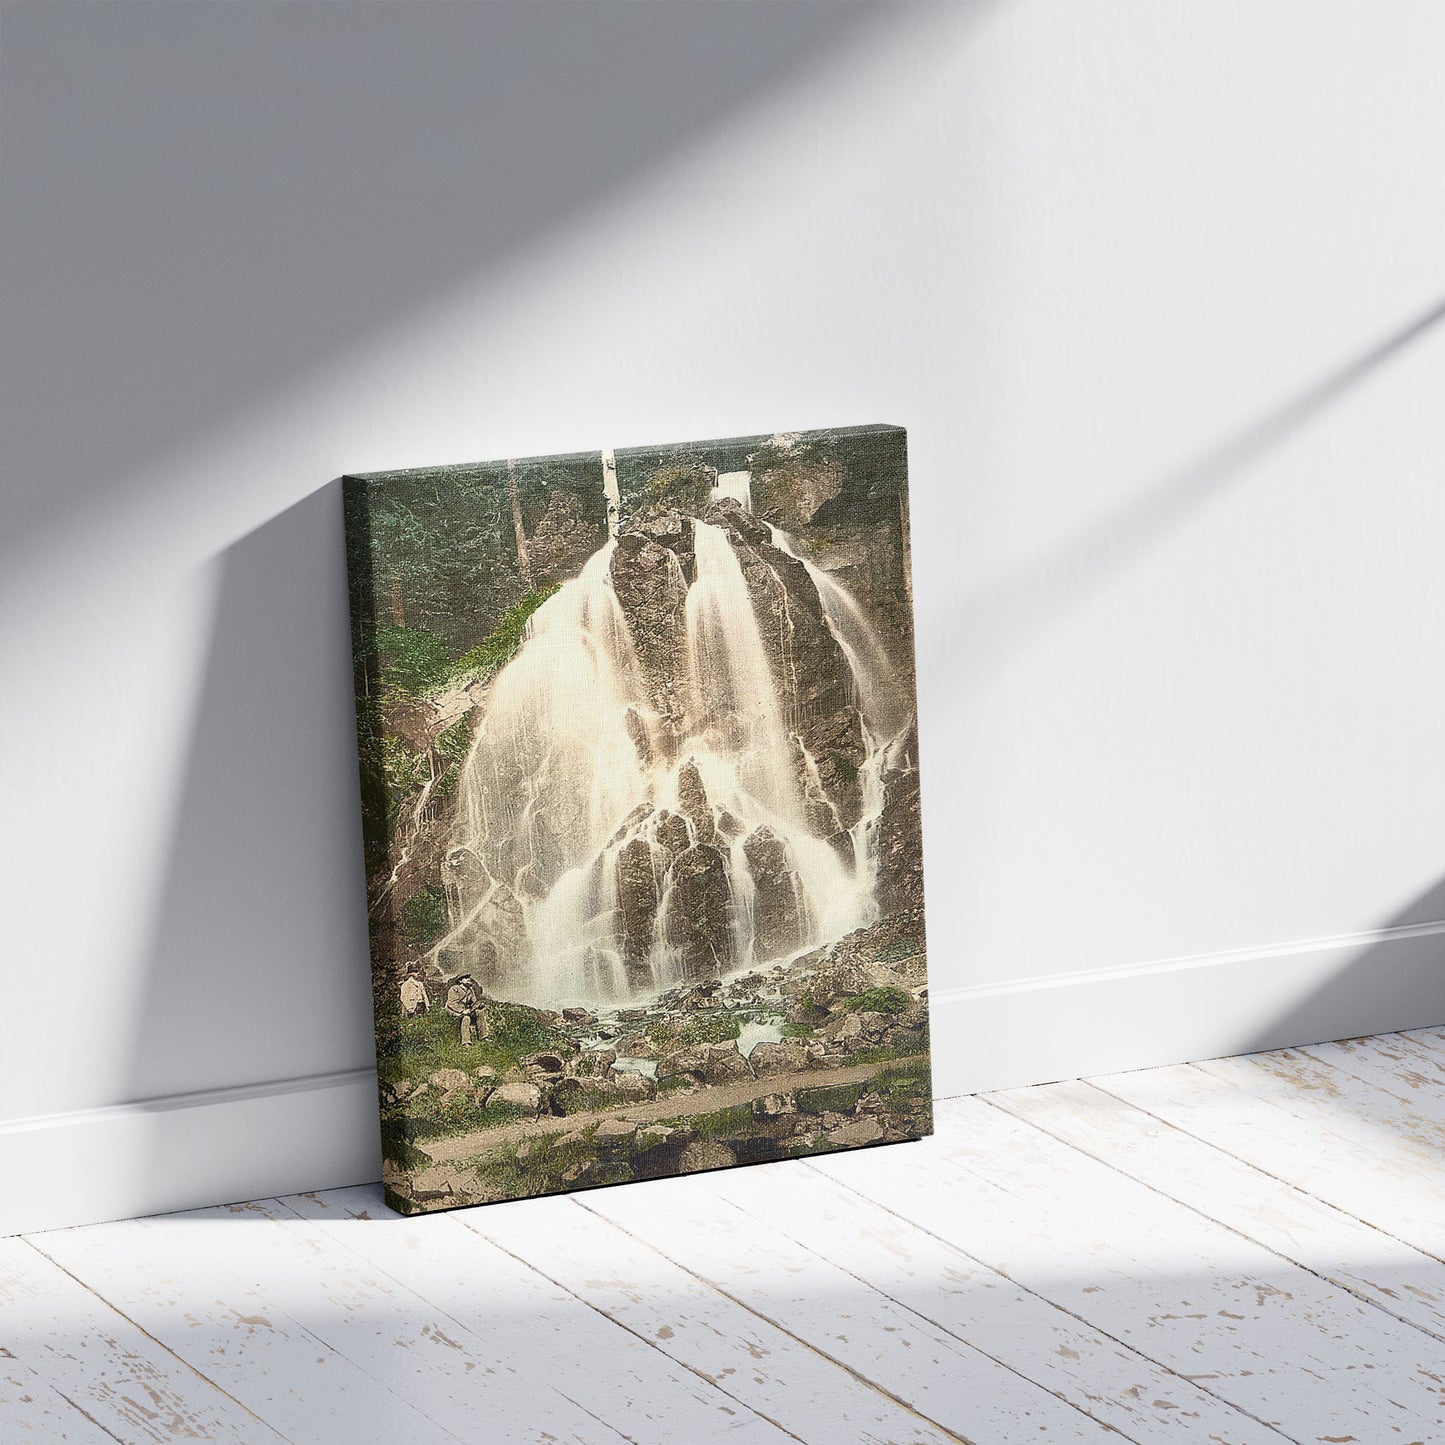 A picture of Radaufall, Harzburg, Hartz, Germany, a mockup of the print leaning against a wall